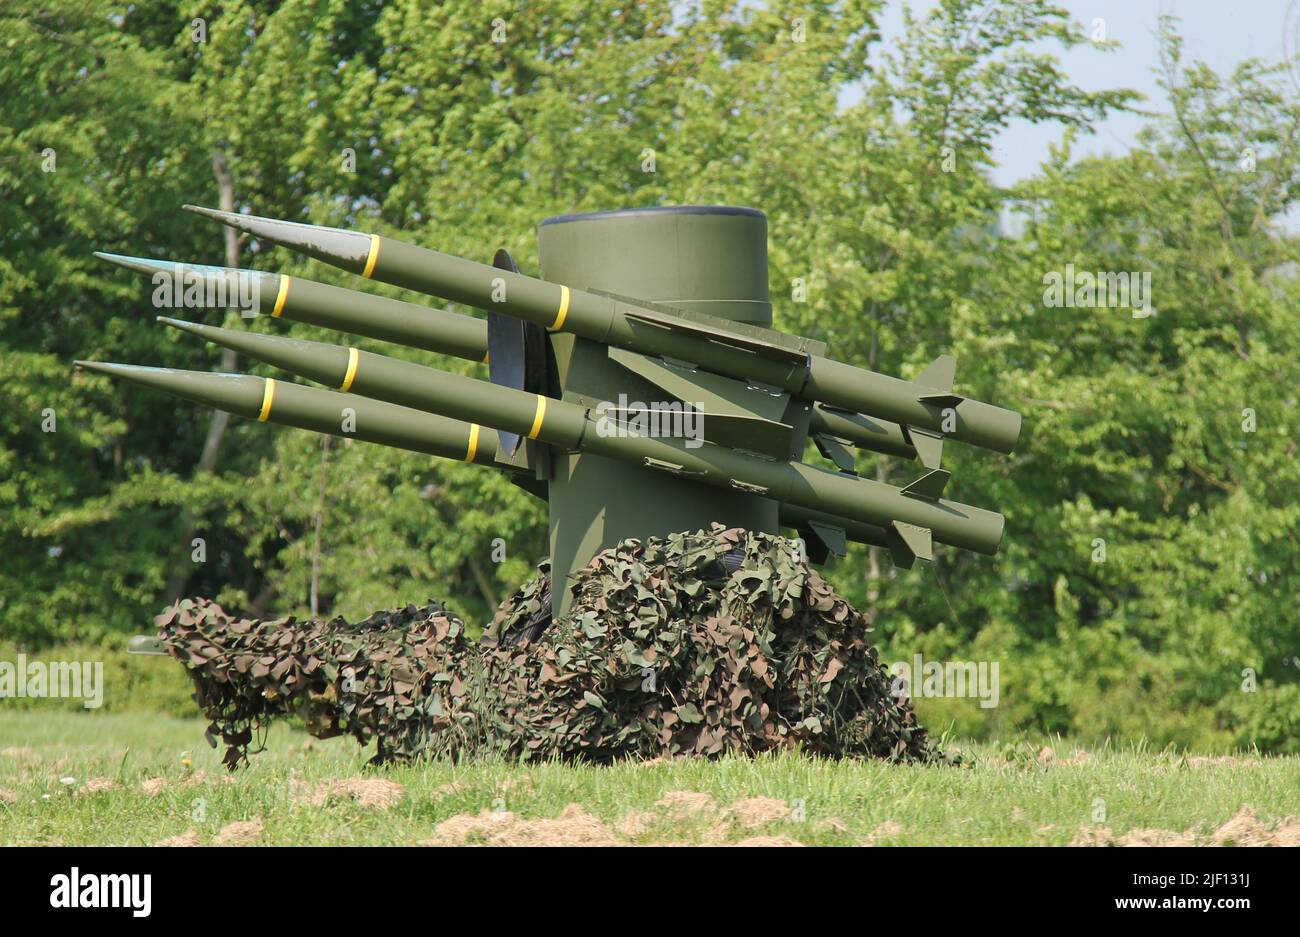 A Mobile Ground to Air Anti Aircraft Missile System. Stock Photo